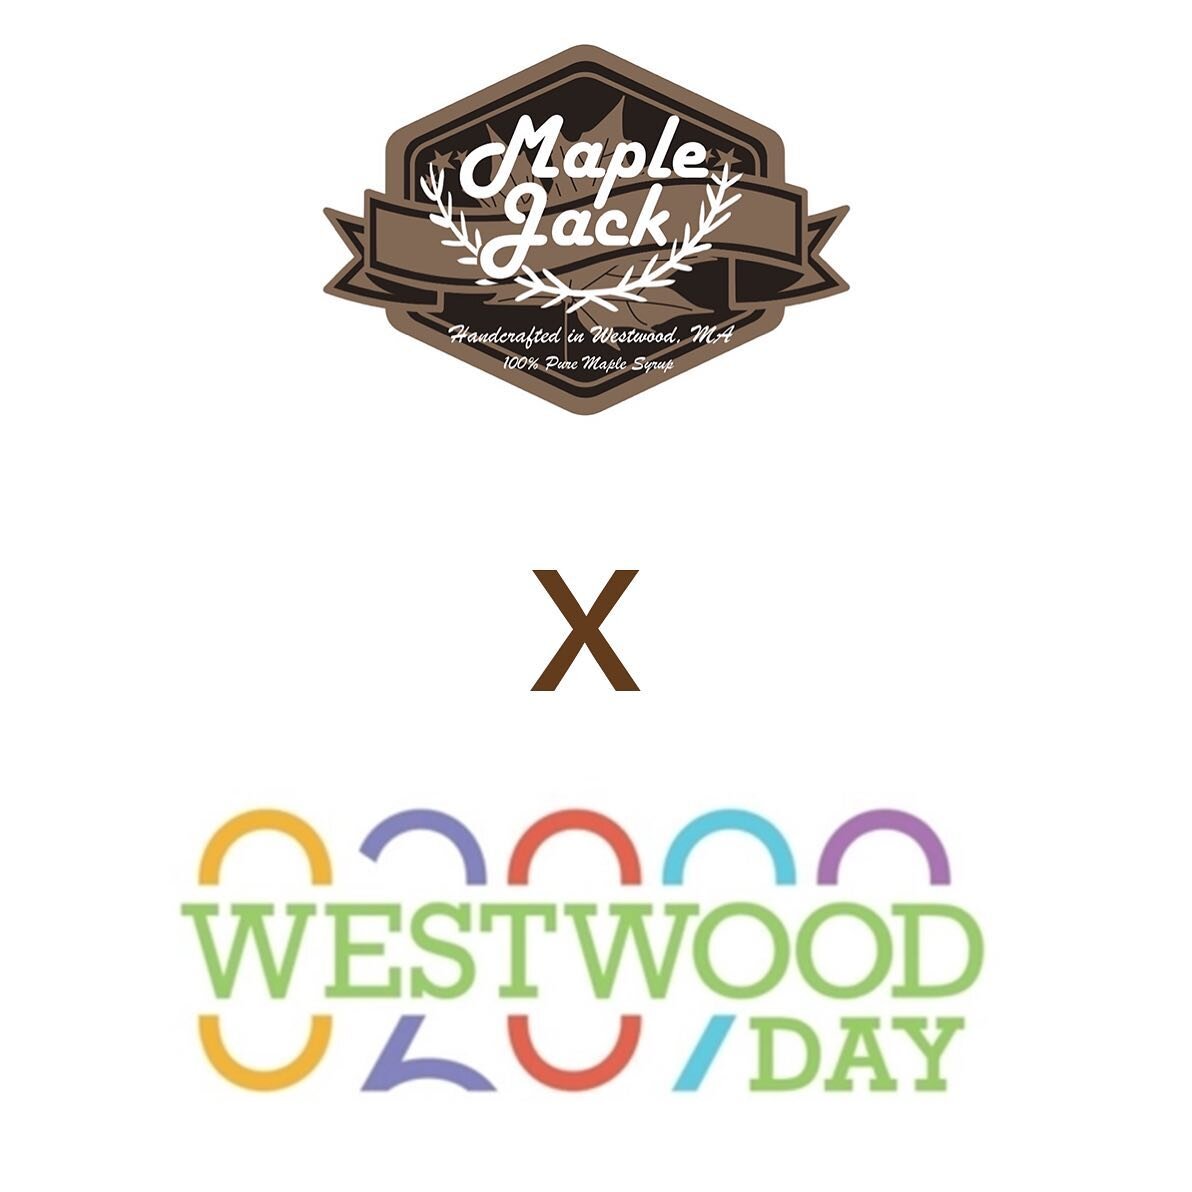 Join Maple Jack at Westwood day! 

🍁🍁🍁

Tomorrow, September 17, at Westwood High